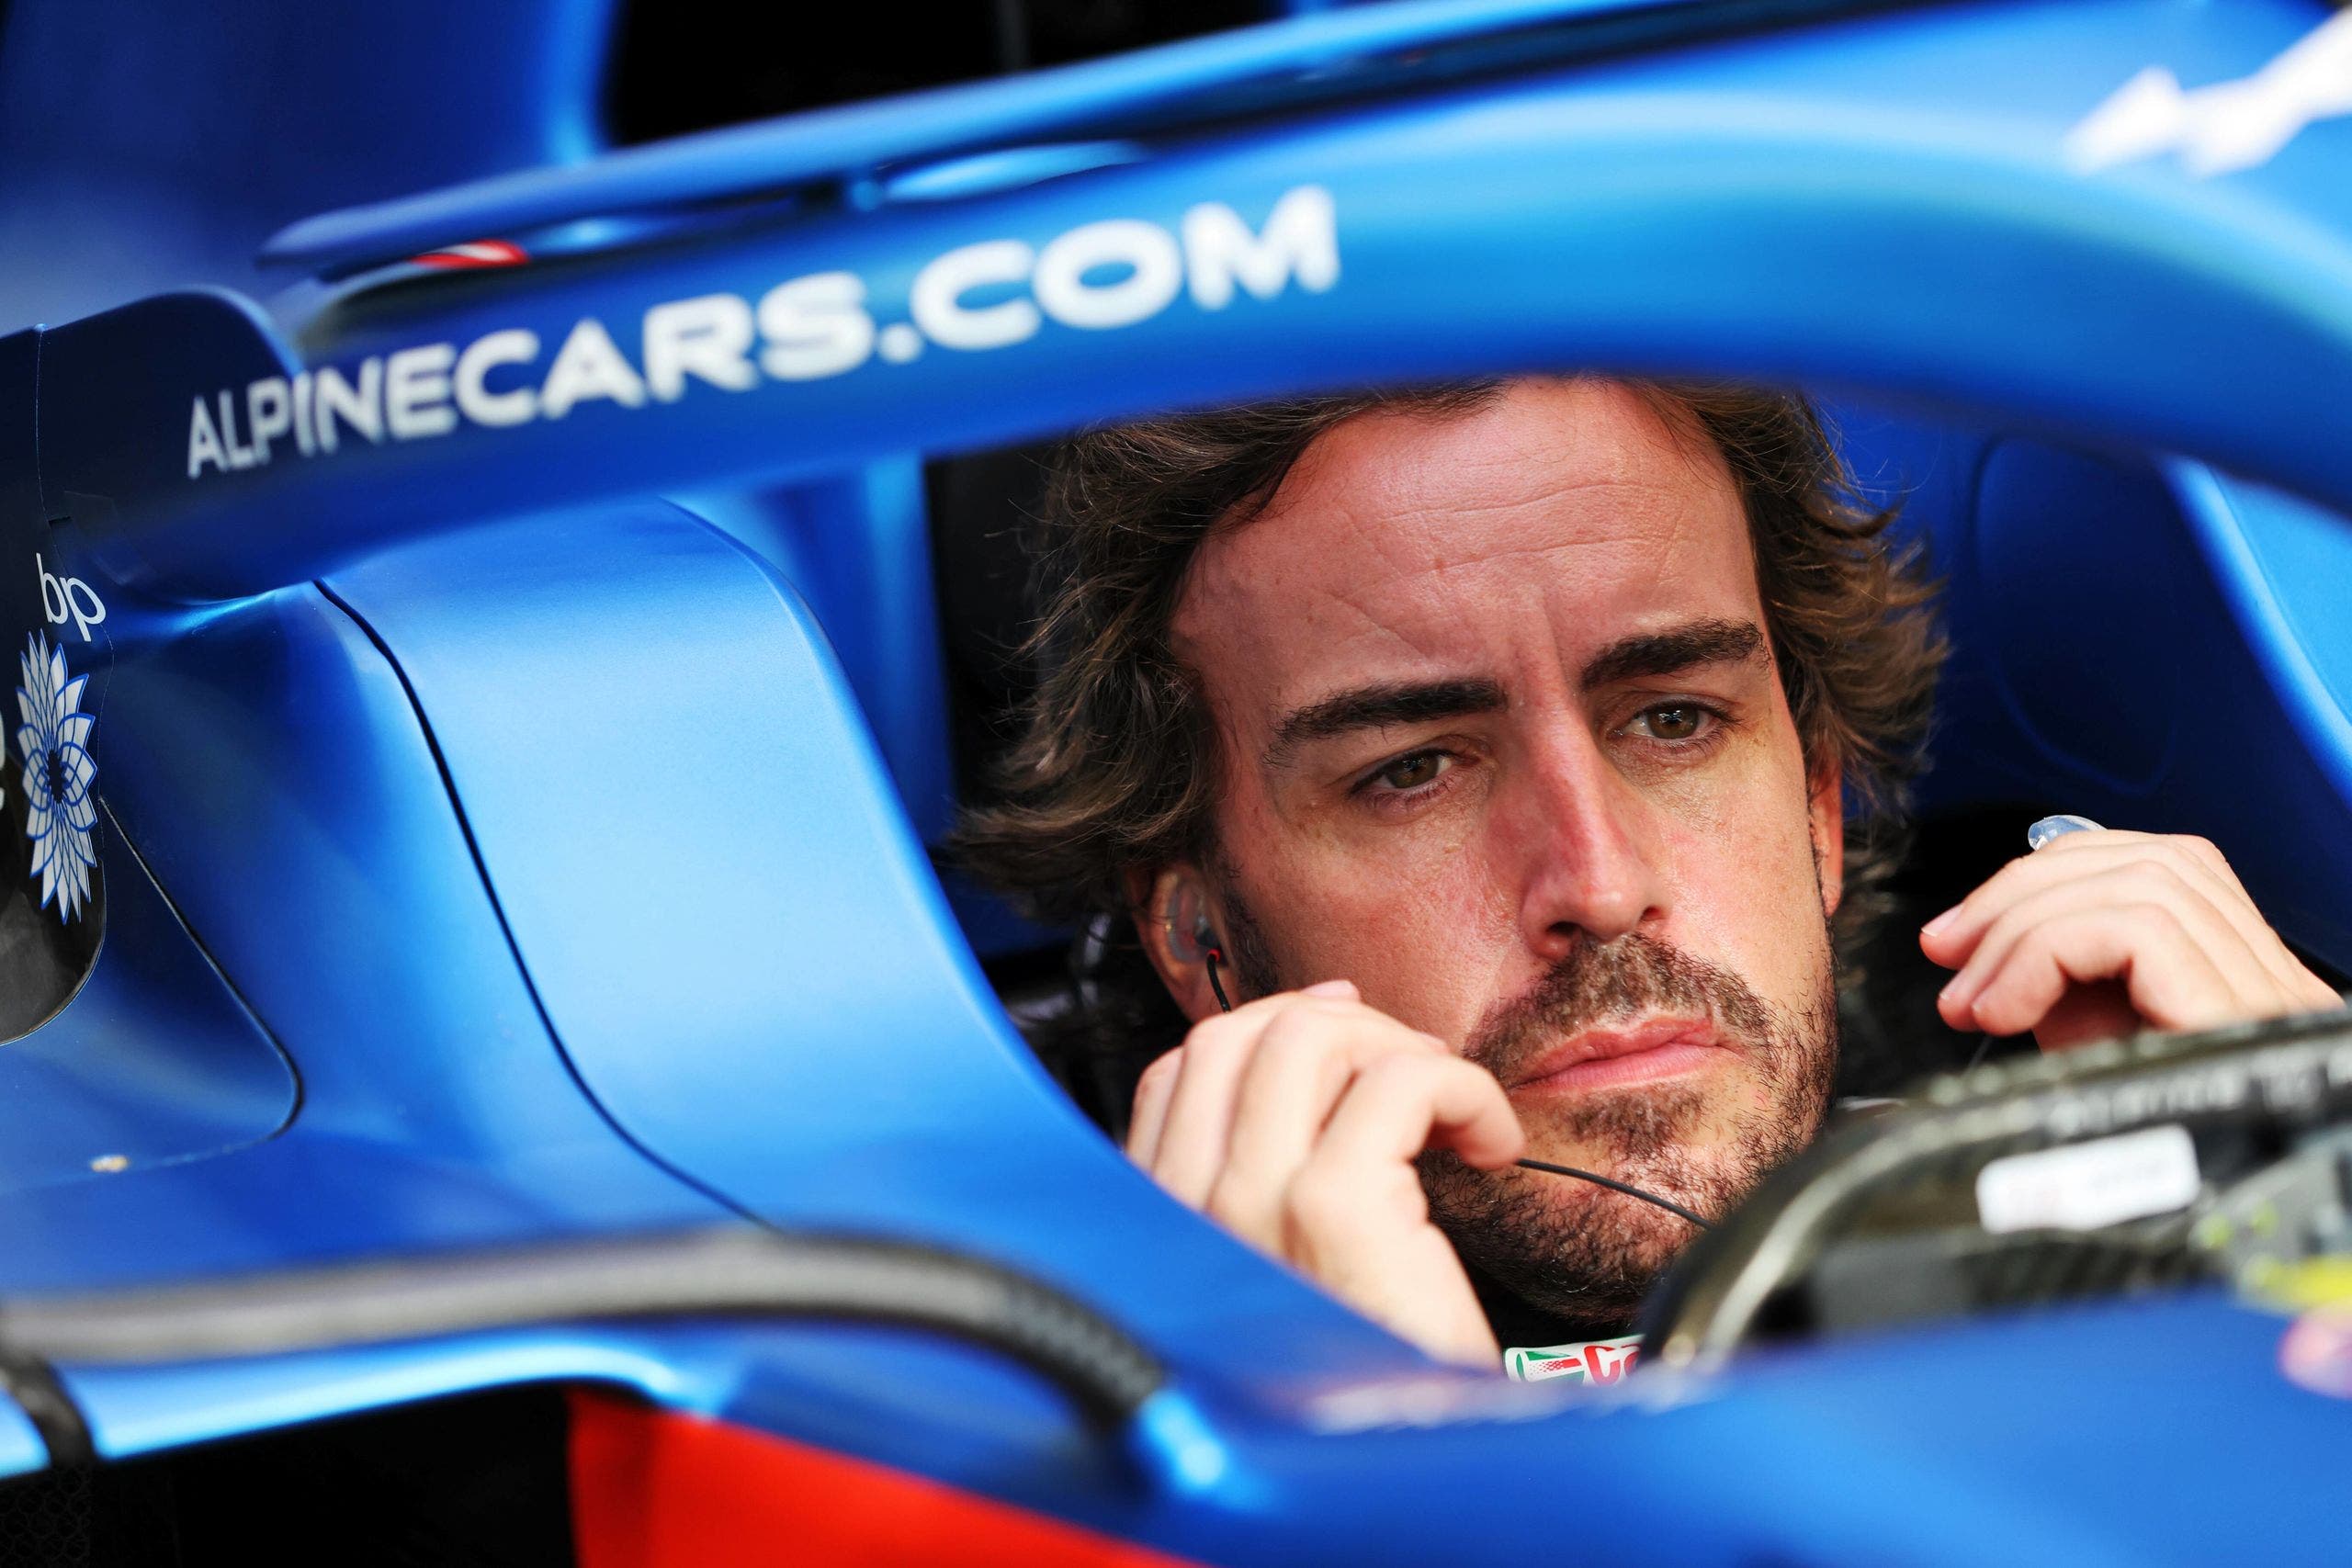 Alpine's unexpected problem puts Fernando Alonso's Plan in check
